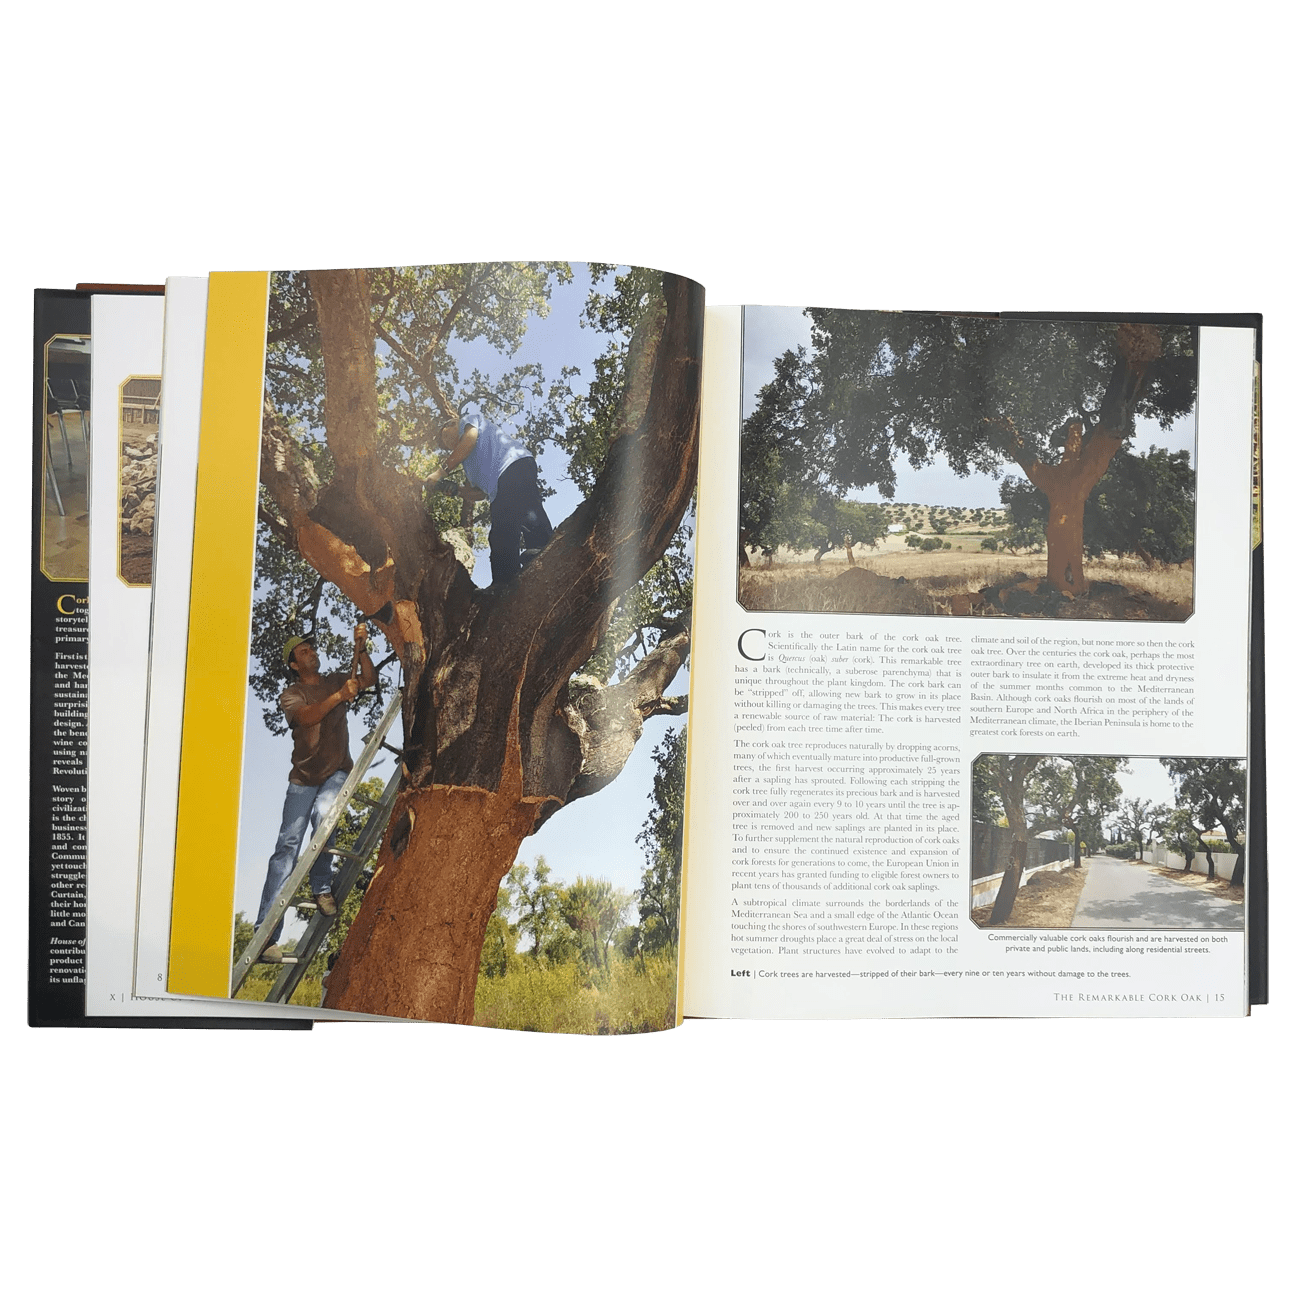 Photo of the interior of the House of Cork book showing cork trees in Portugal during the harvest. 